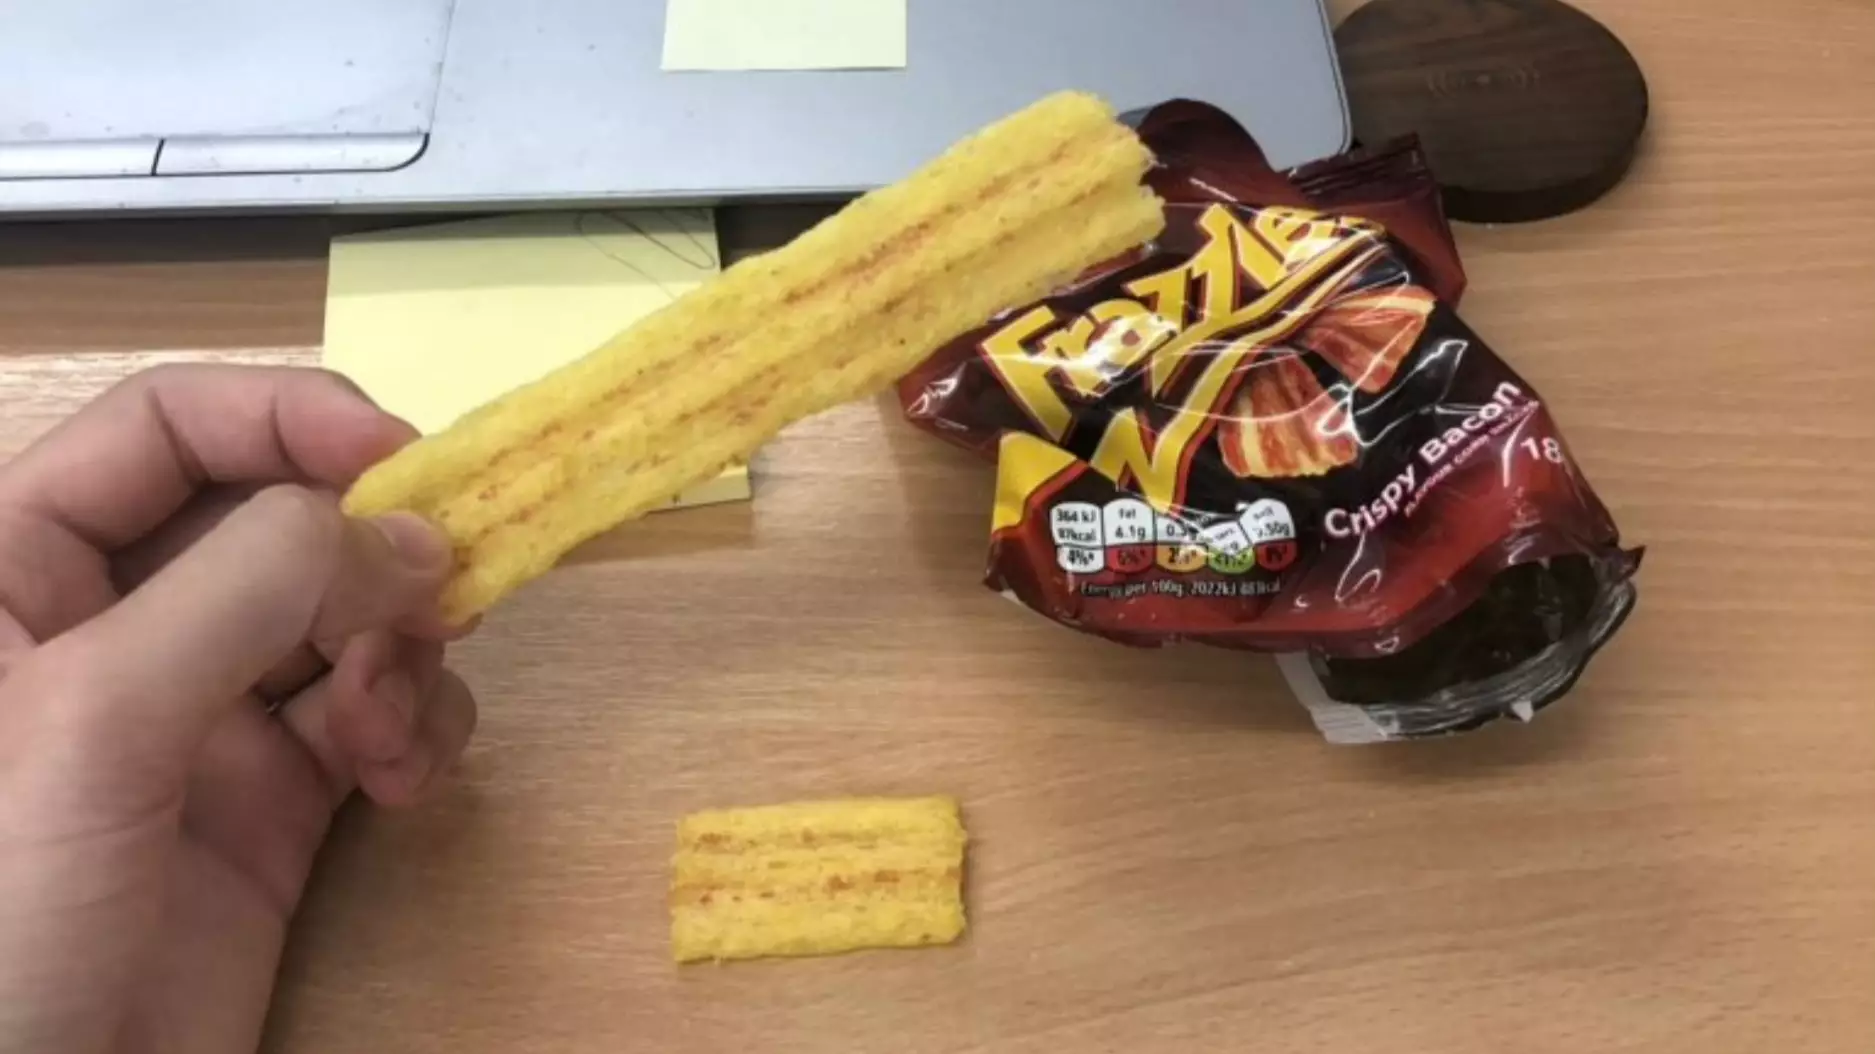 Man Finds Massive 'World Record' Sized Frazzle Inside Packet Of Crisps